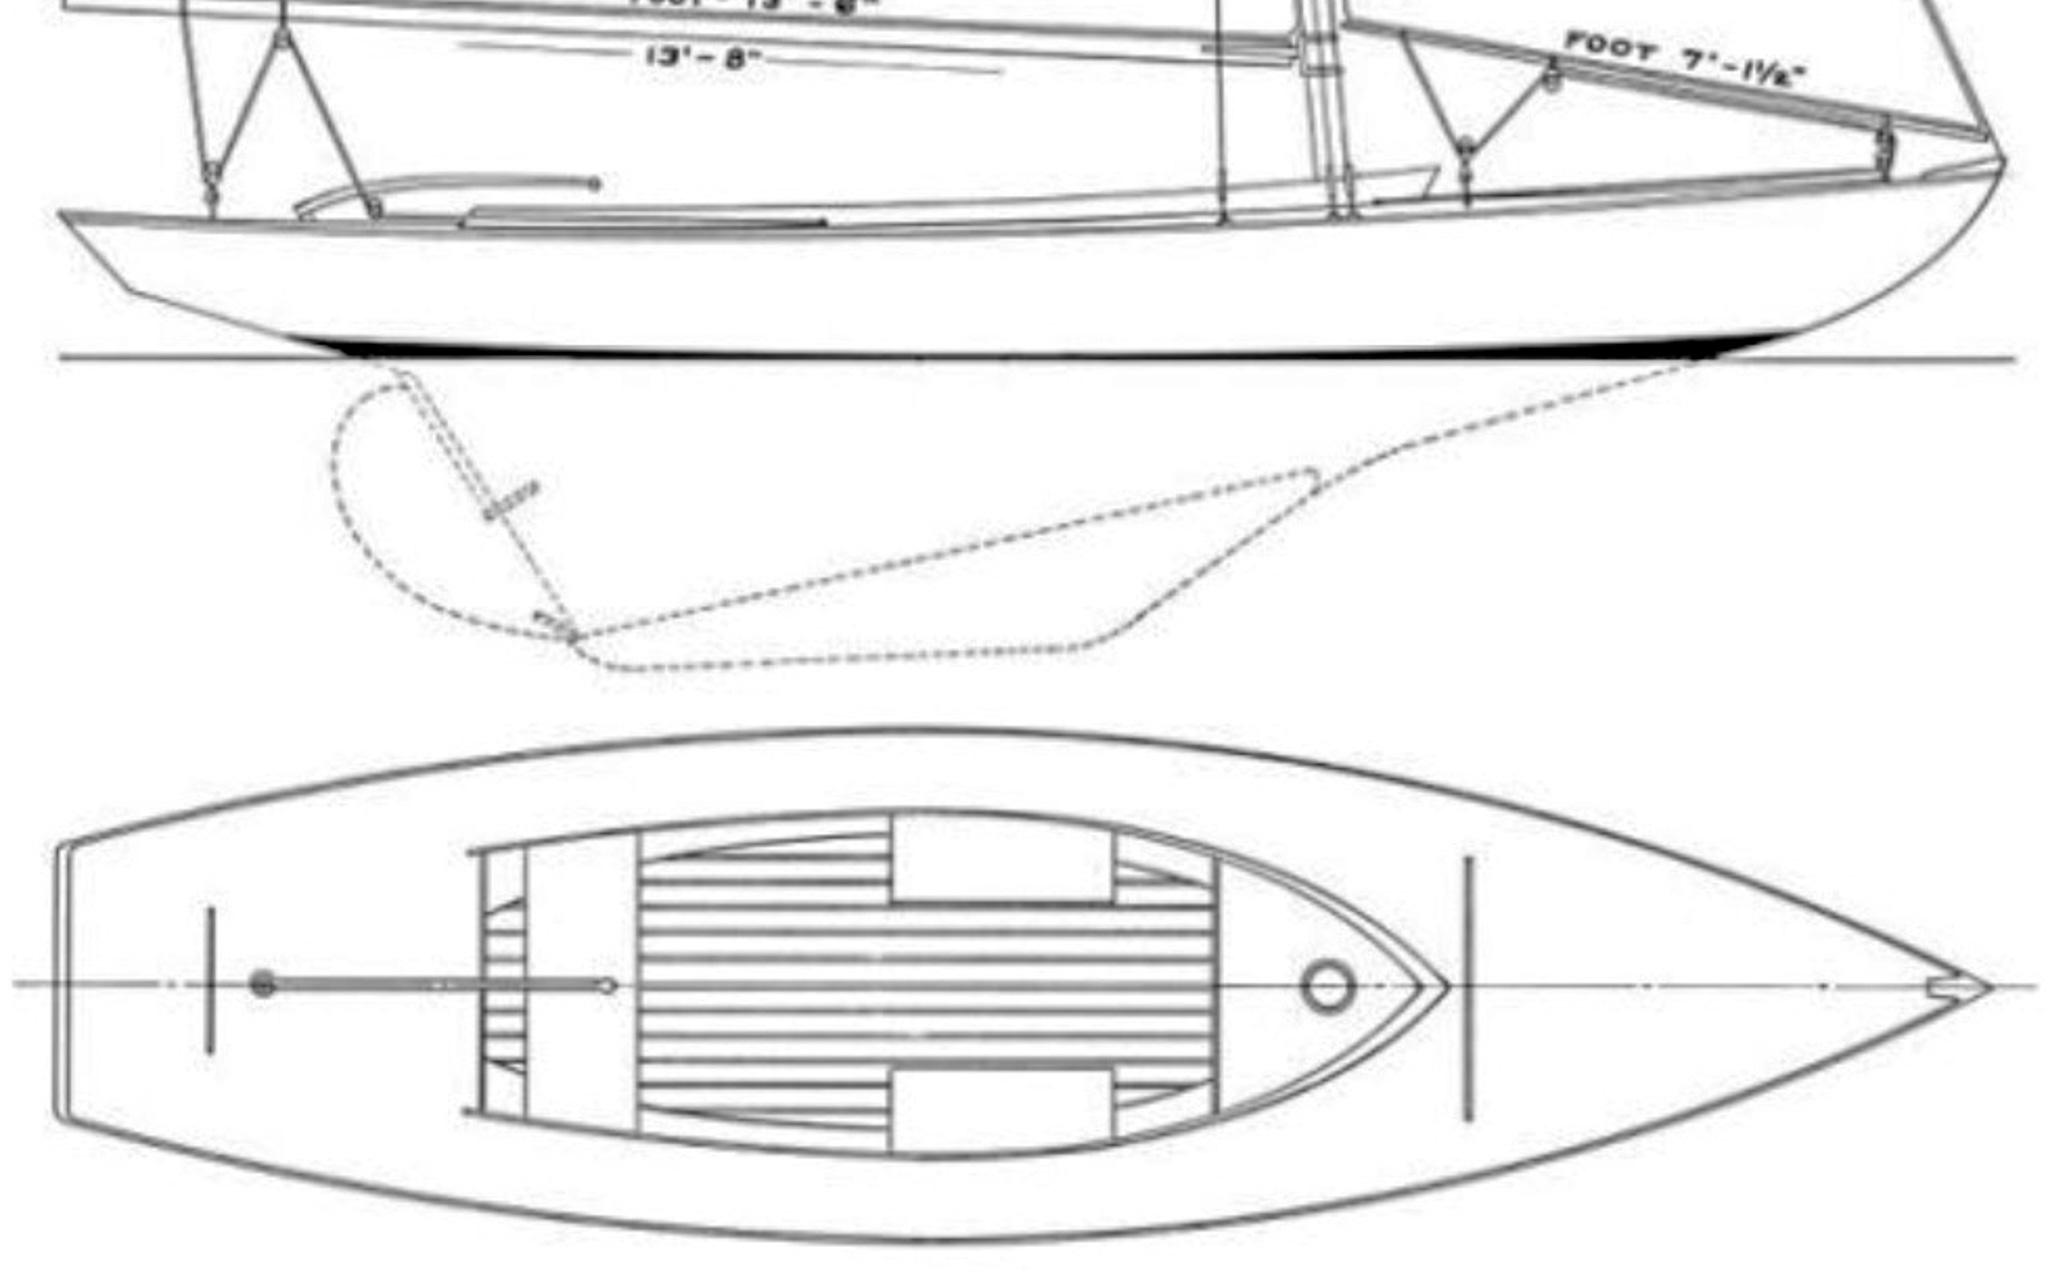 Sparkman and Stephens - Manhasset Bay One Design - Gala - Line Drawings